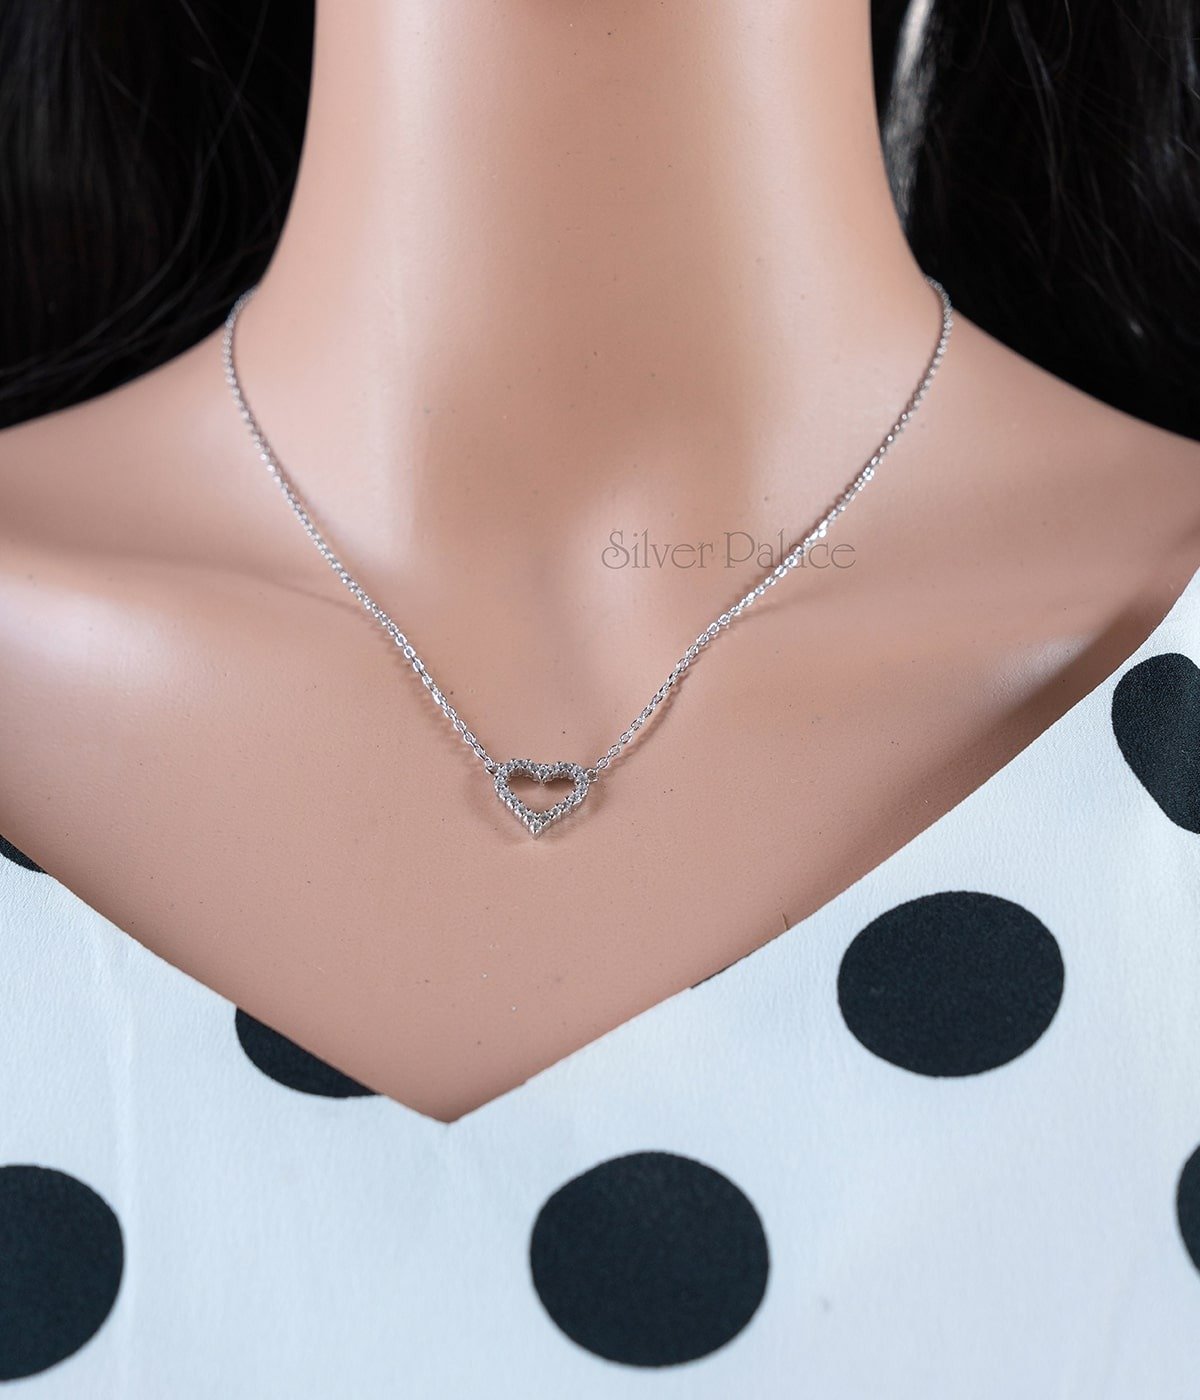 92.5 STERLING SILVER TINY HOLLOW HEART WITH STONE  PENDANT